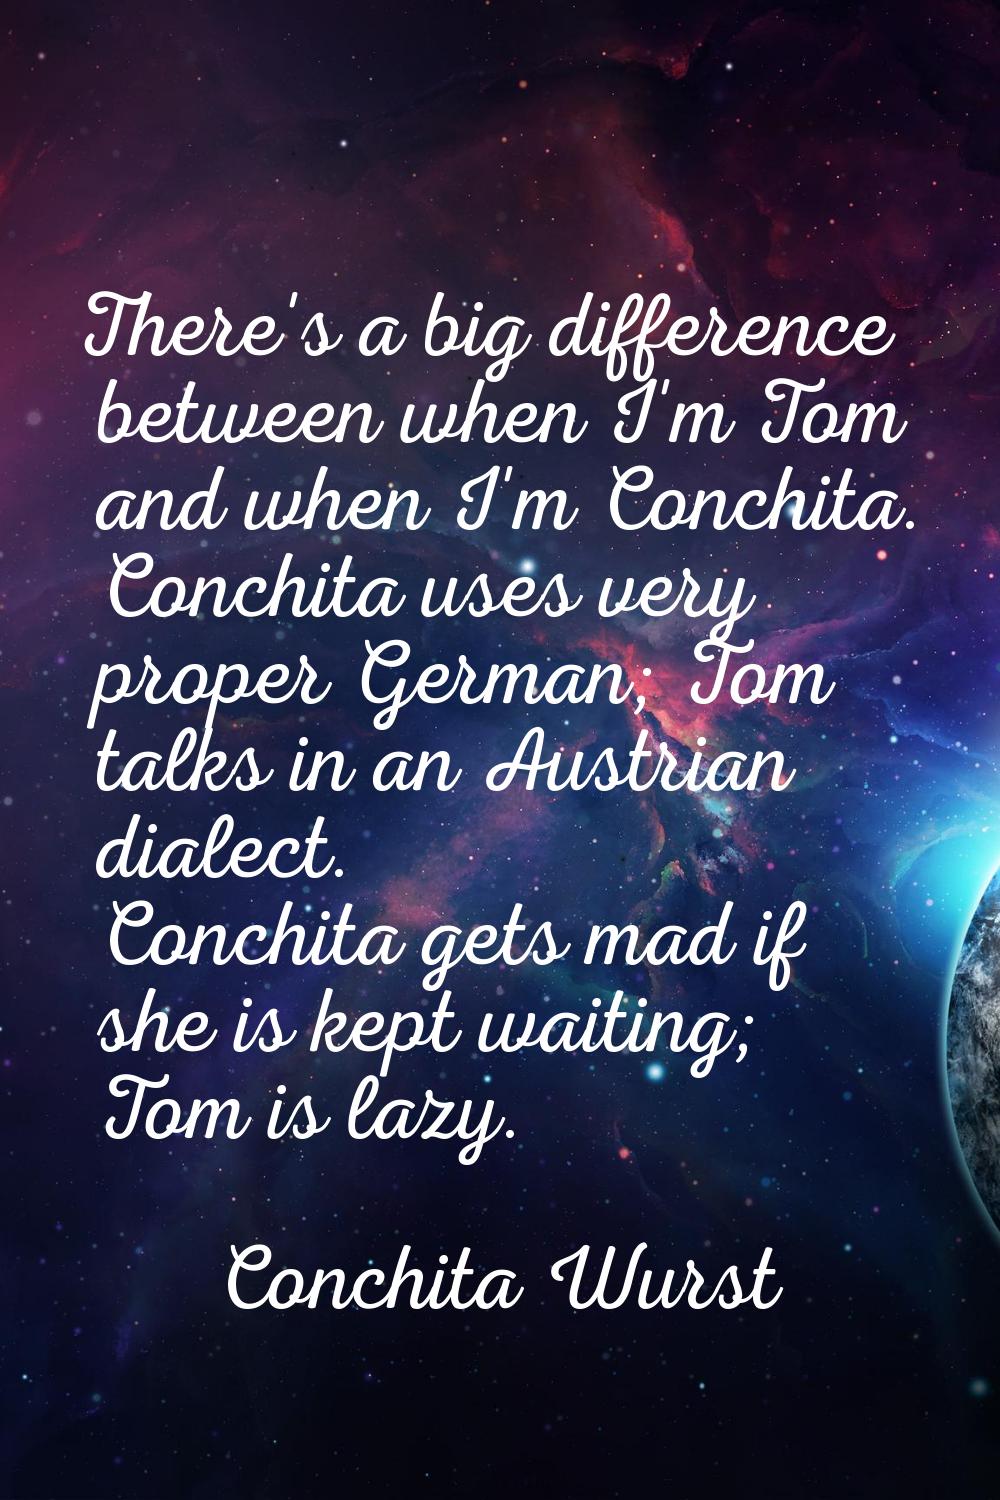 There's a big difference between when I'm Tom and when I'm Conchita. Conchita uses very proper Germ